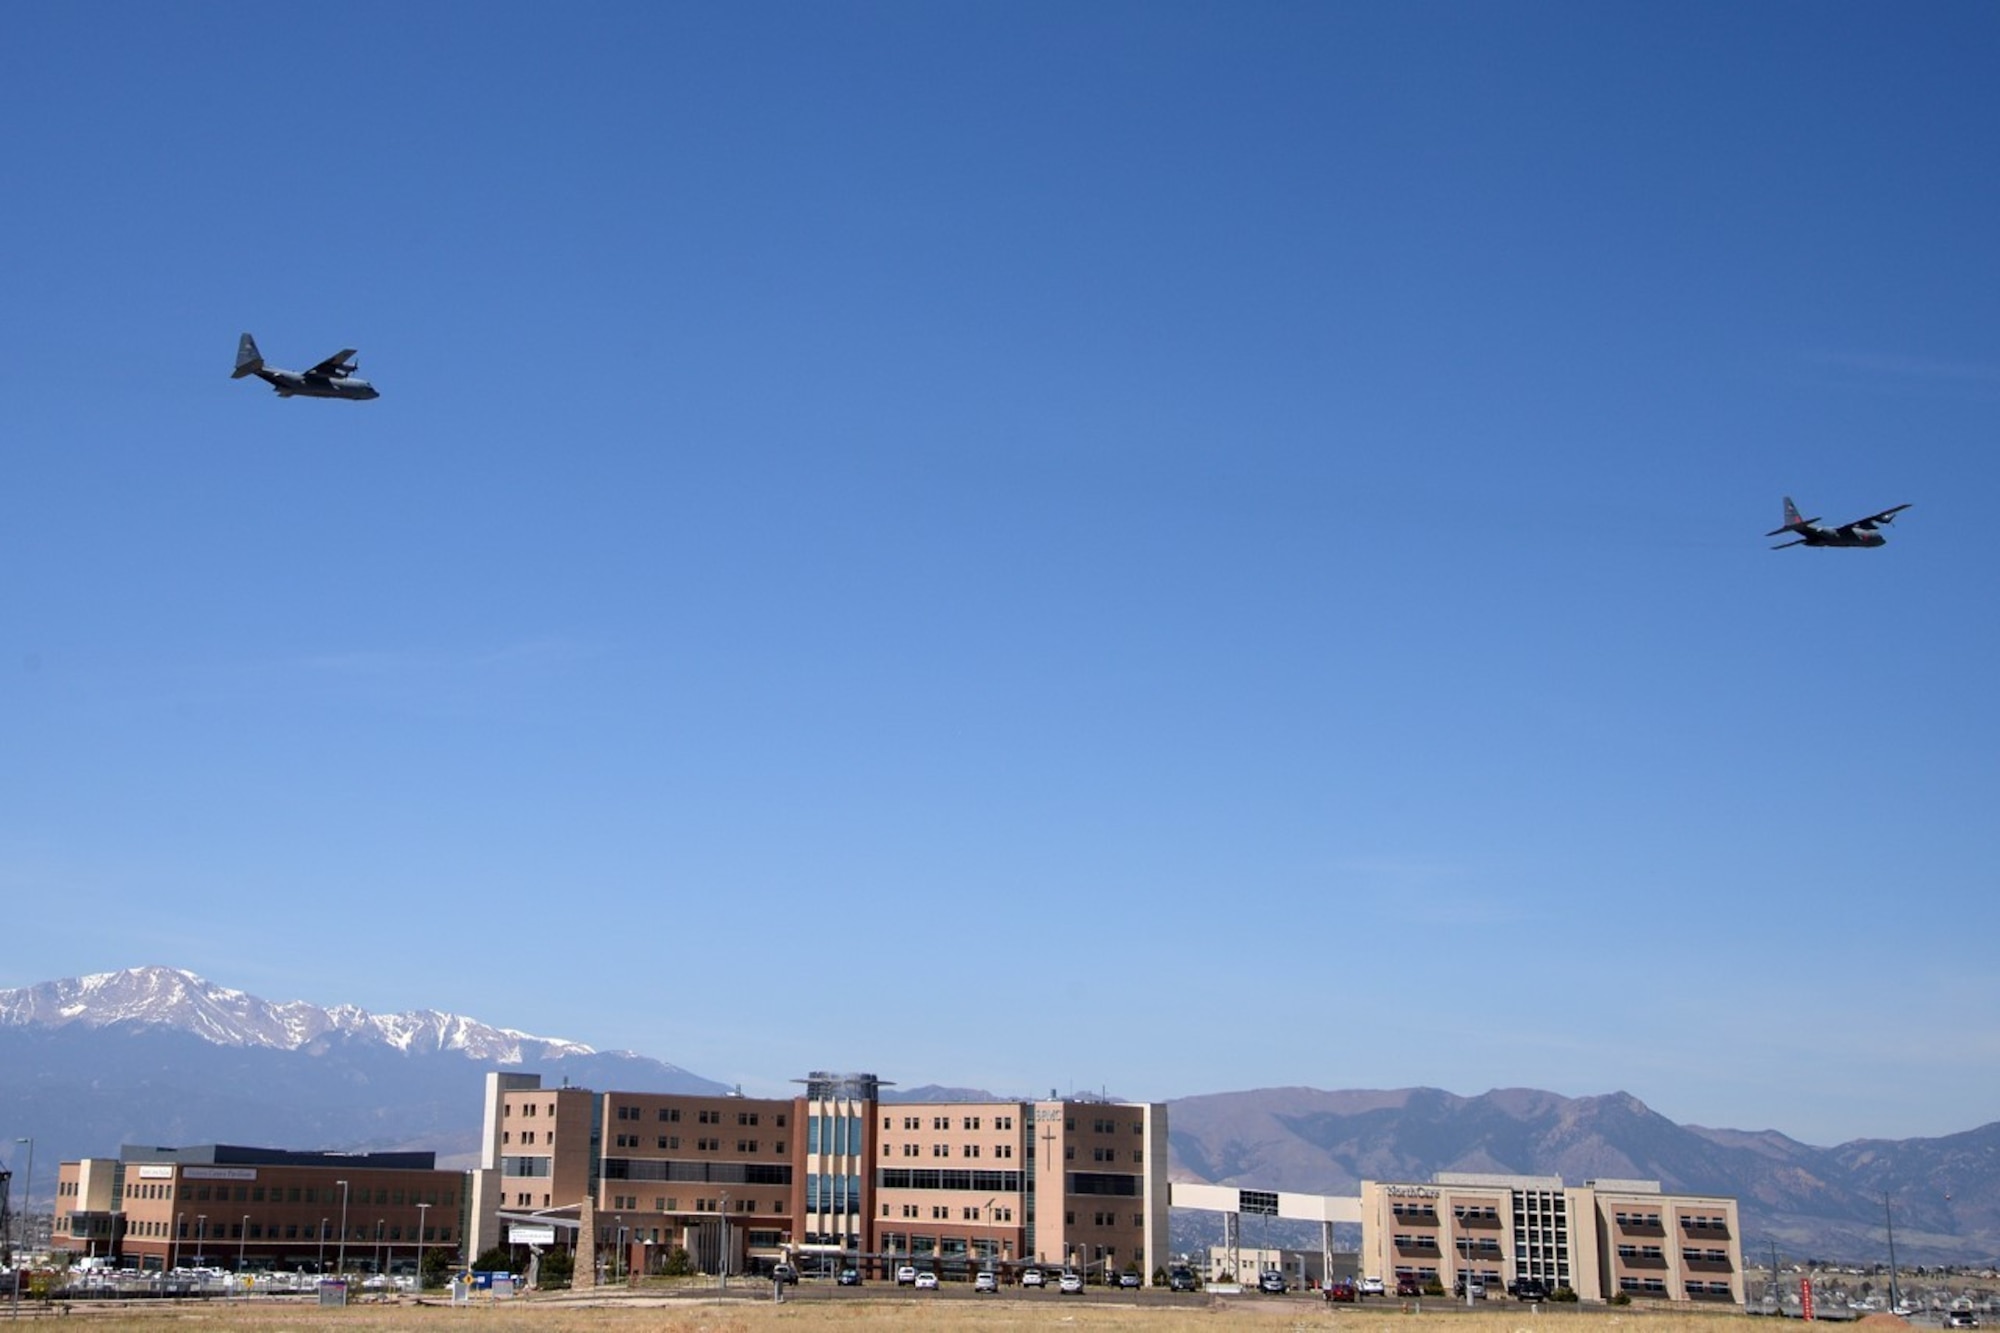 Image shows two large aircraft flying over Colorado Springs hospital